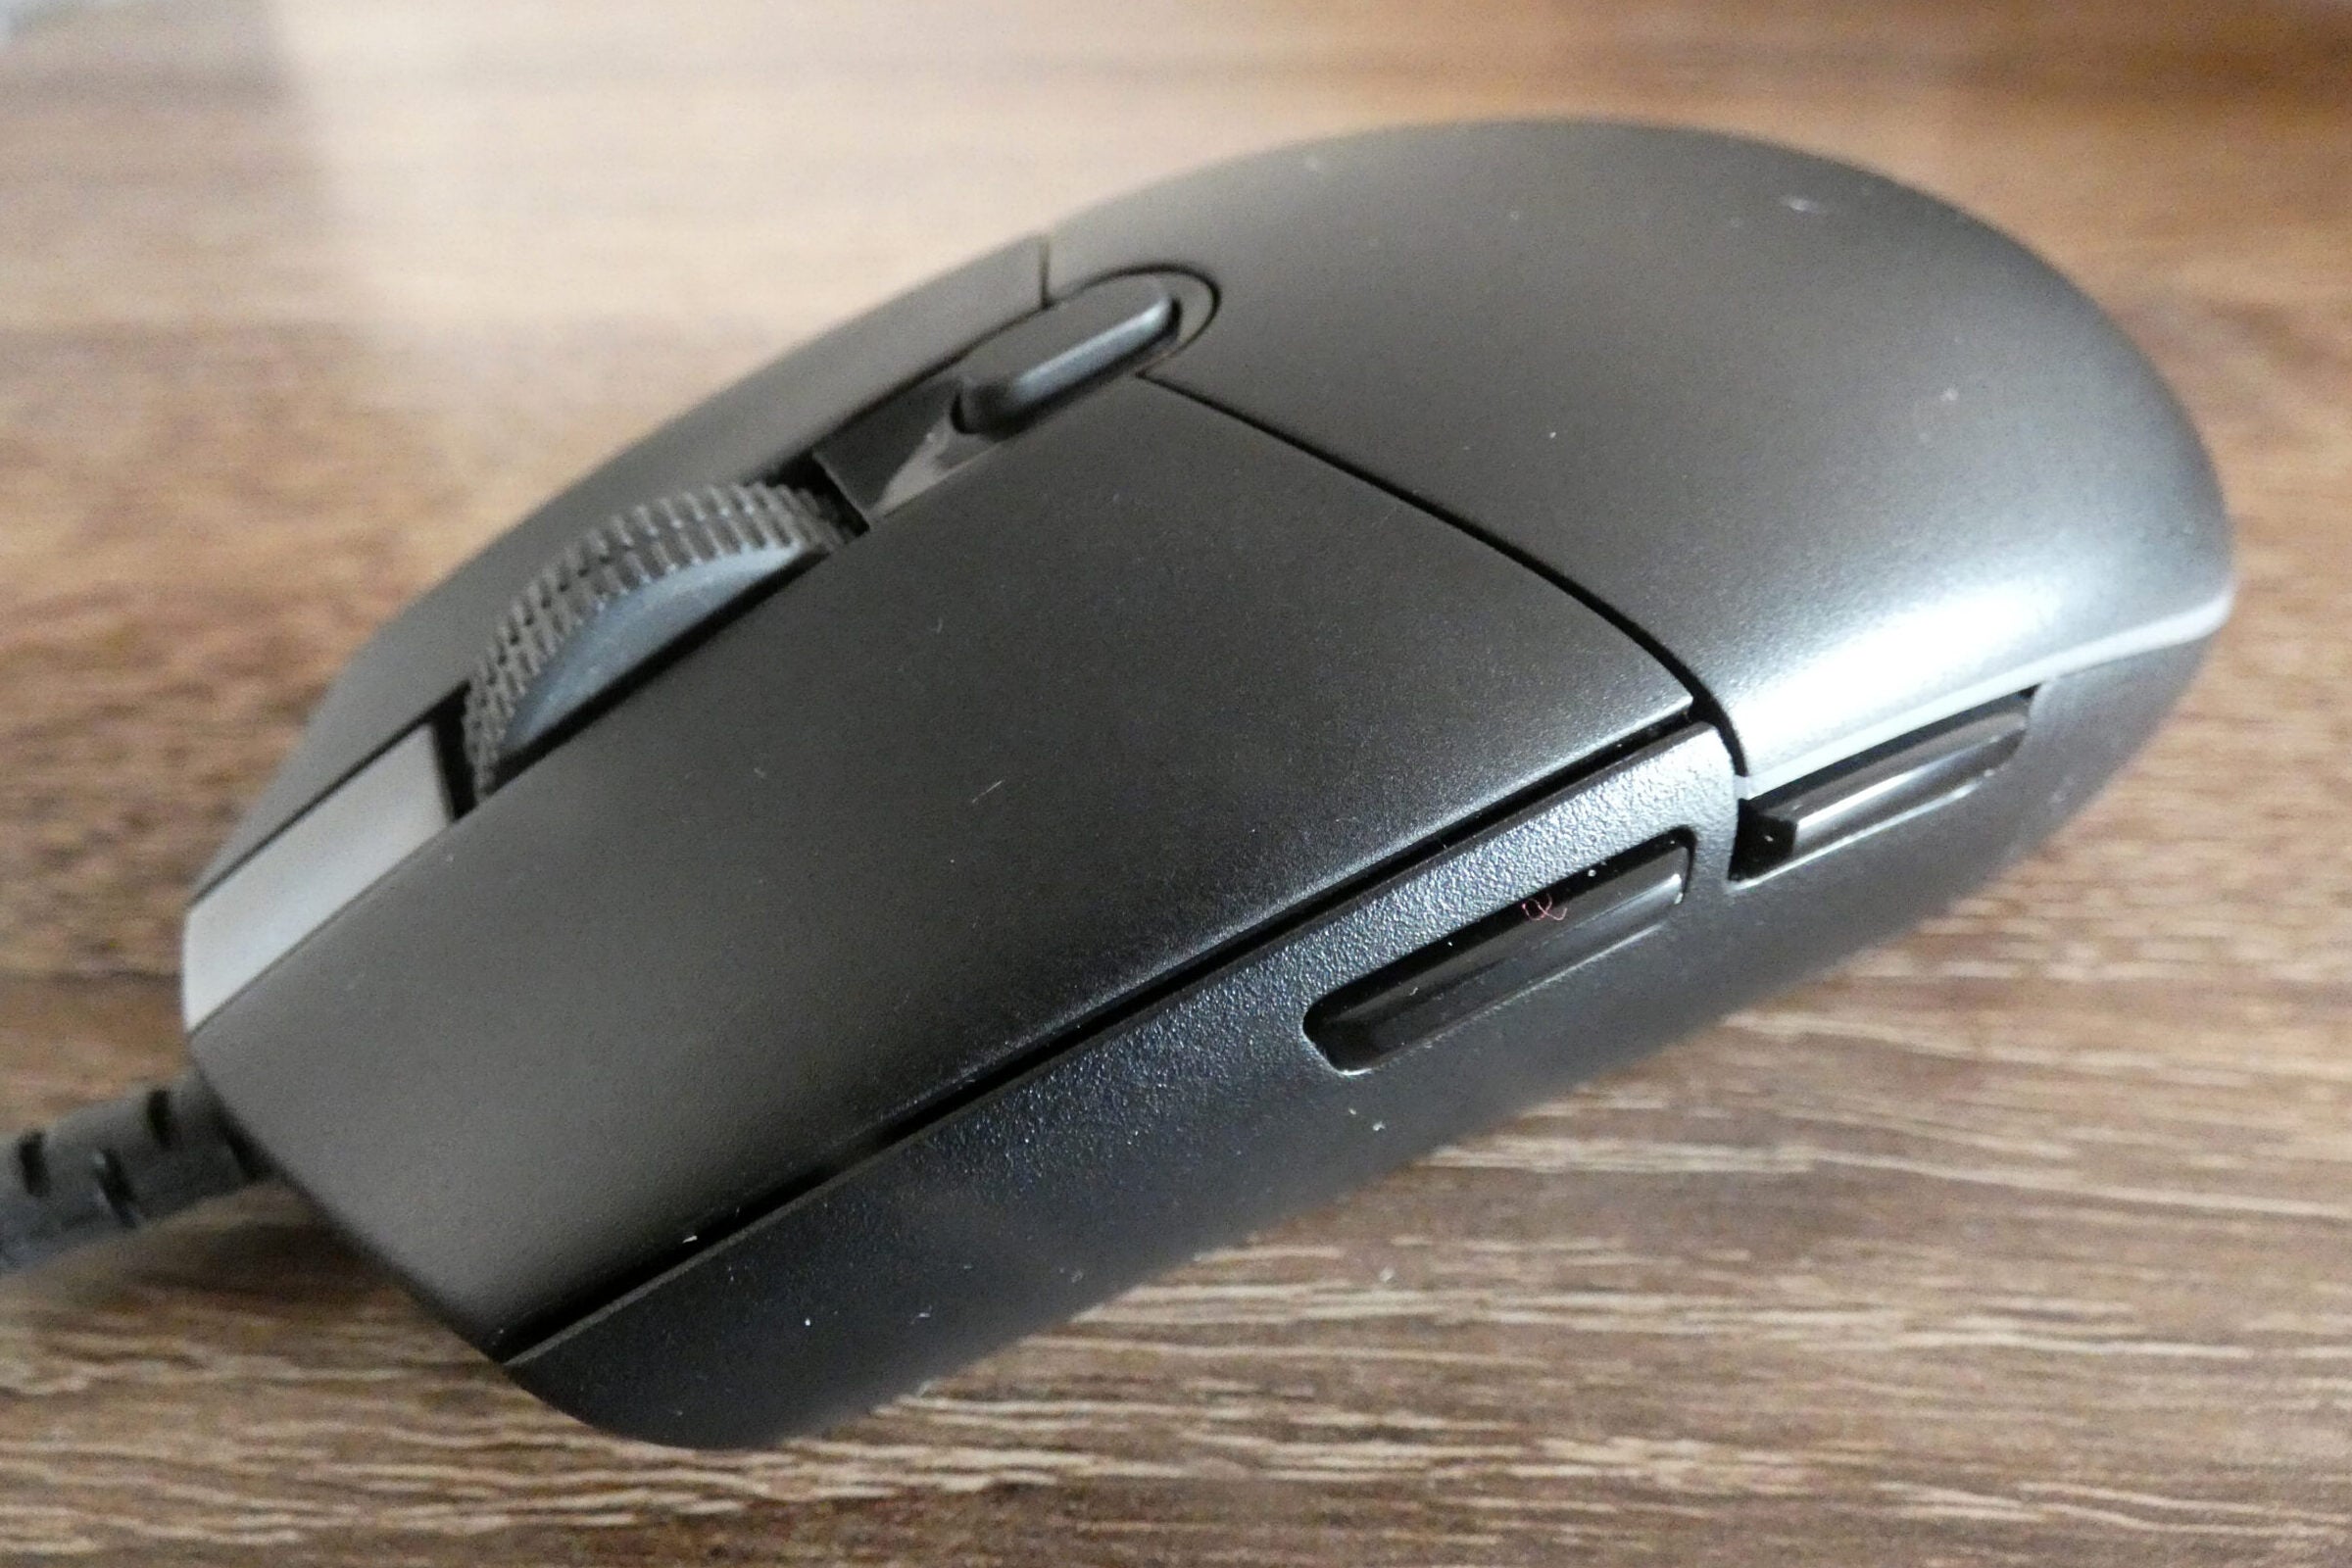 Front right view of a black G203 lightsync mouse, with close up view of additional side buttons